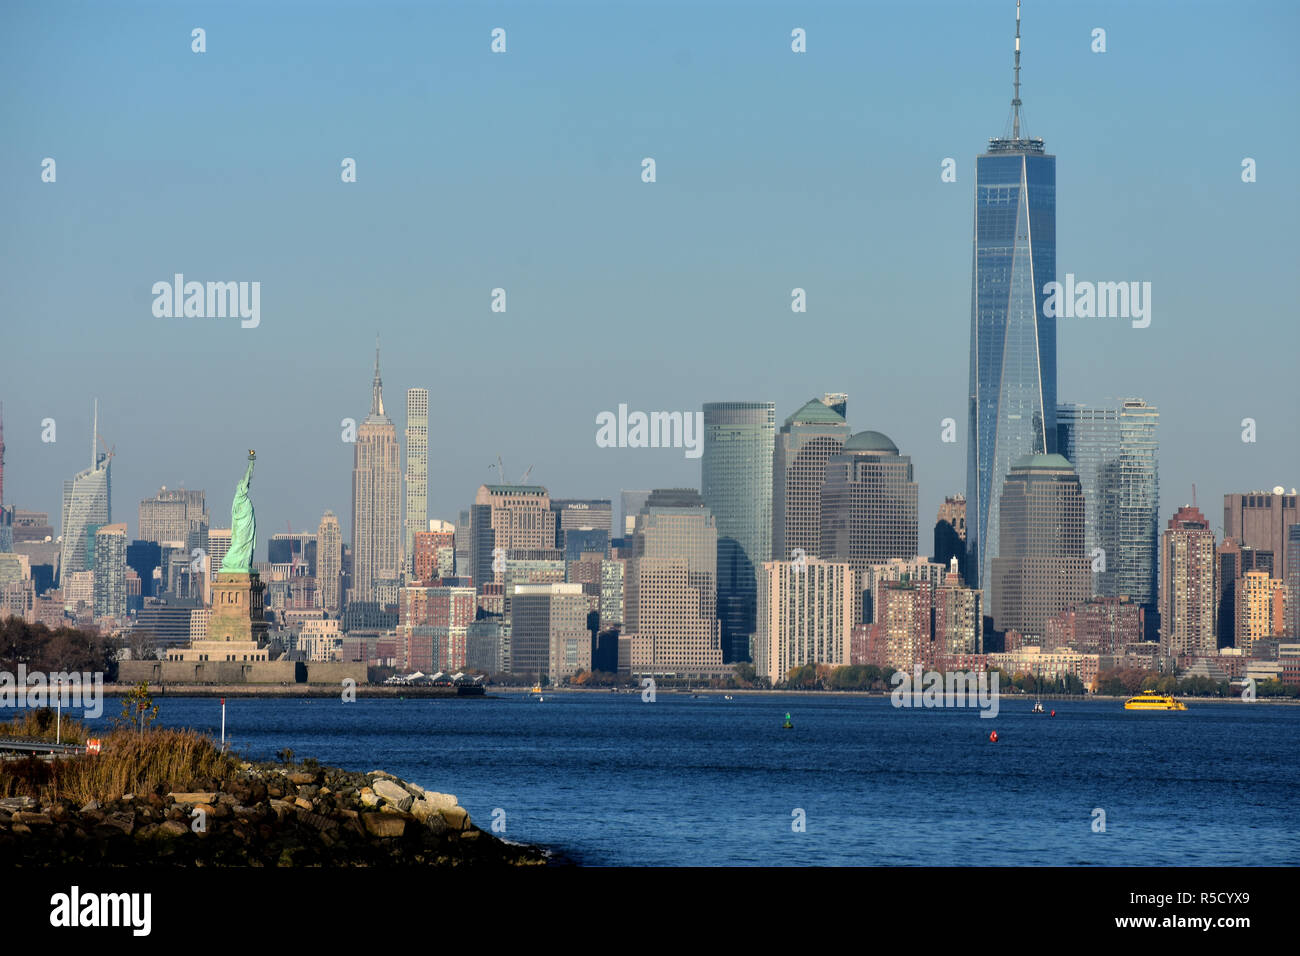 A view of three of New York City's landmarks from across the Hudson River; the Statue of Liberty, the  Empire State Building, and the Freedom Tower. Stock Photo